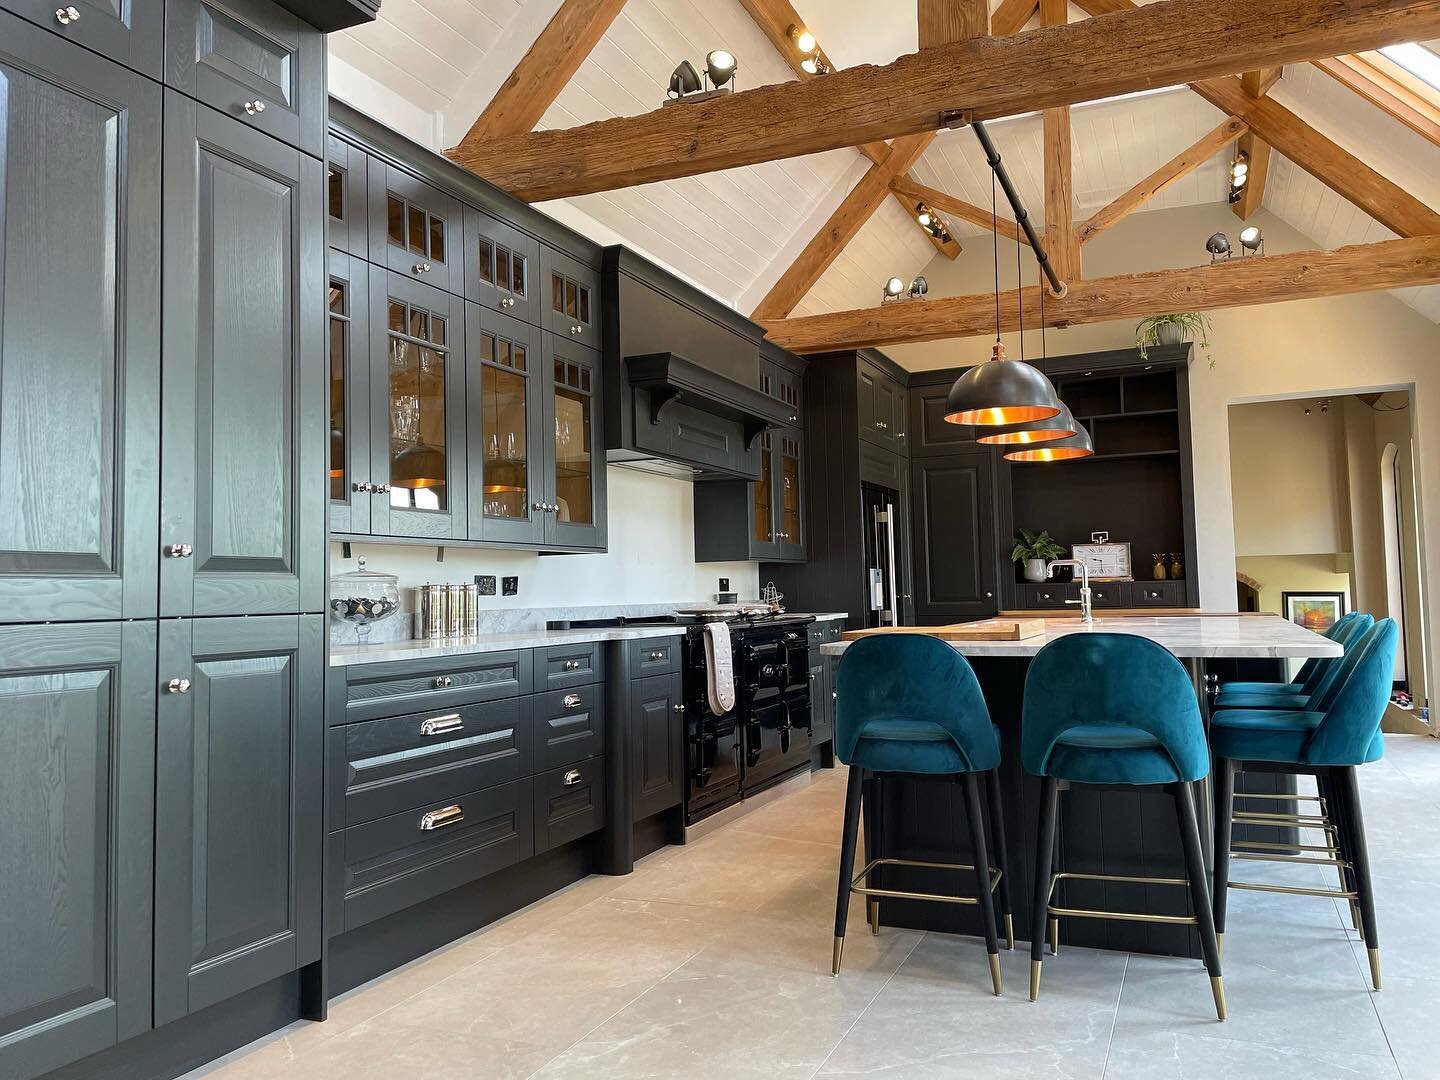 This recently completed kitchen is a finely crafted in-frame timber design and looks stunning in this Black Paint to Order finish.
Bring country style to life with the Harwood collection from Laura Ashley.
Please get in touch with us to find out more